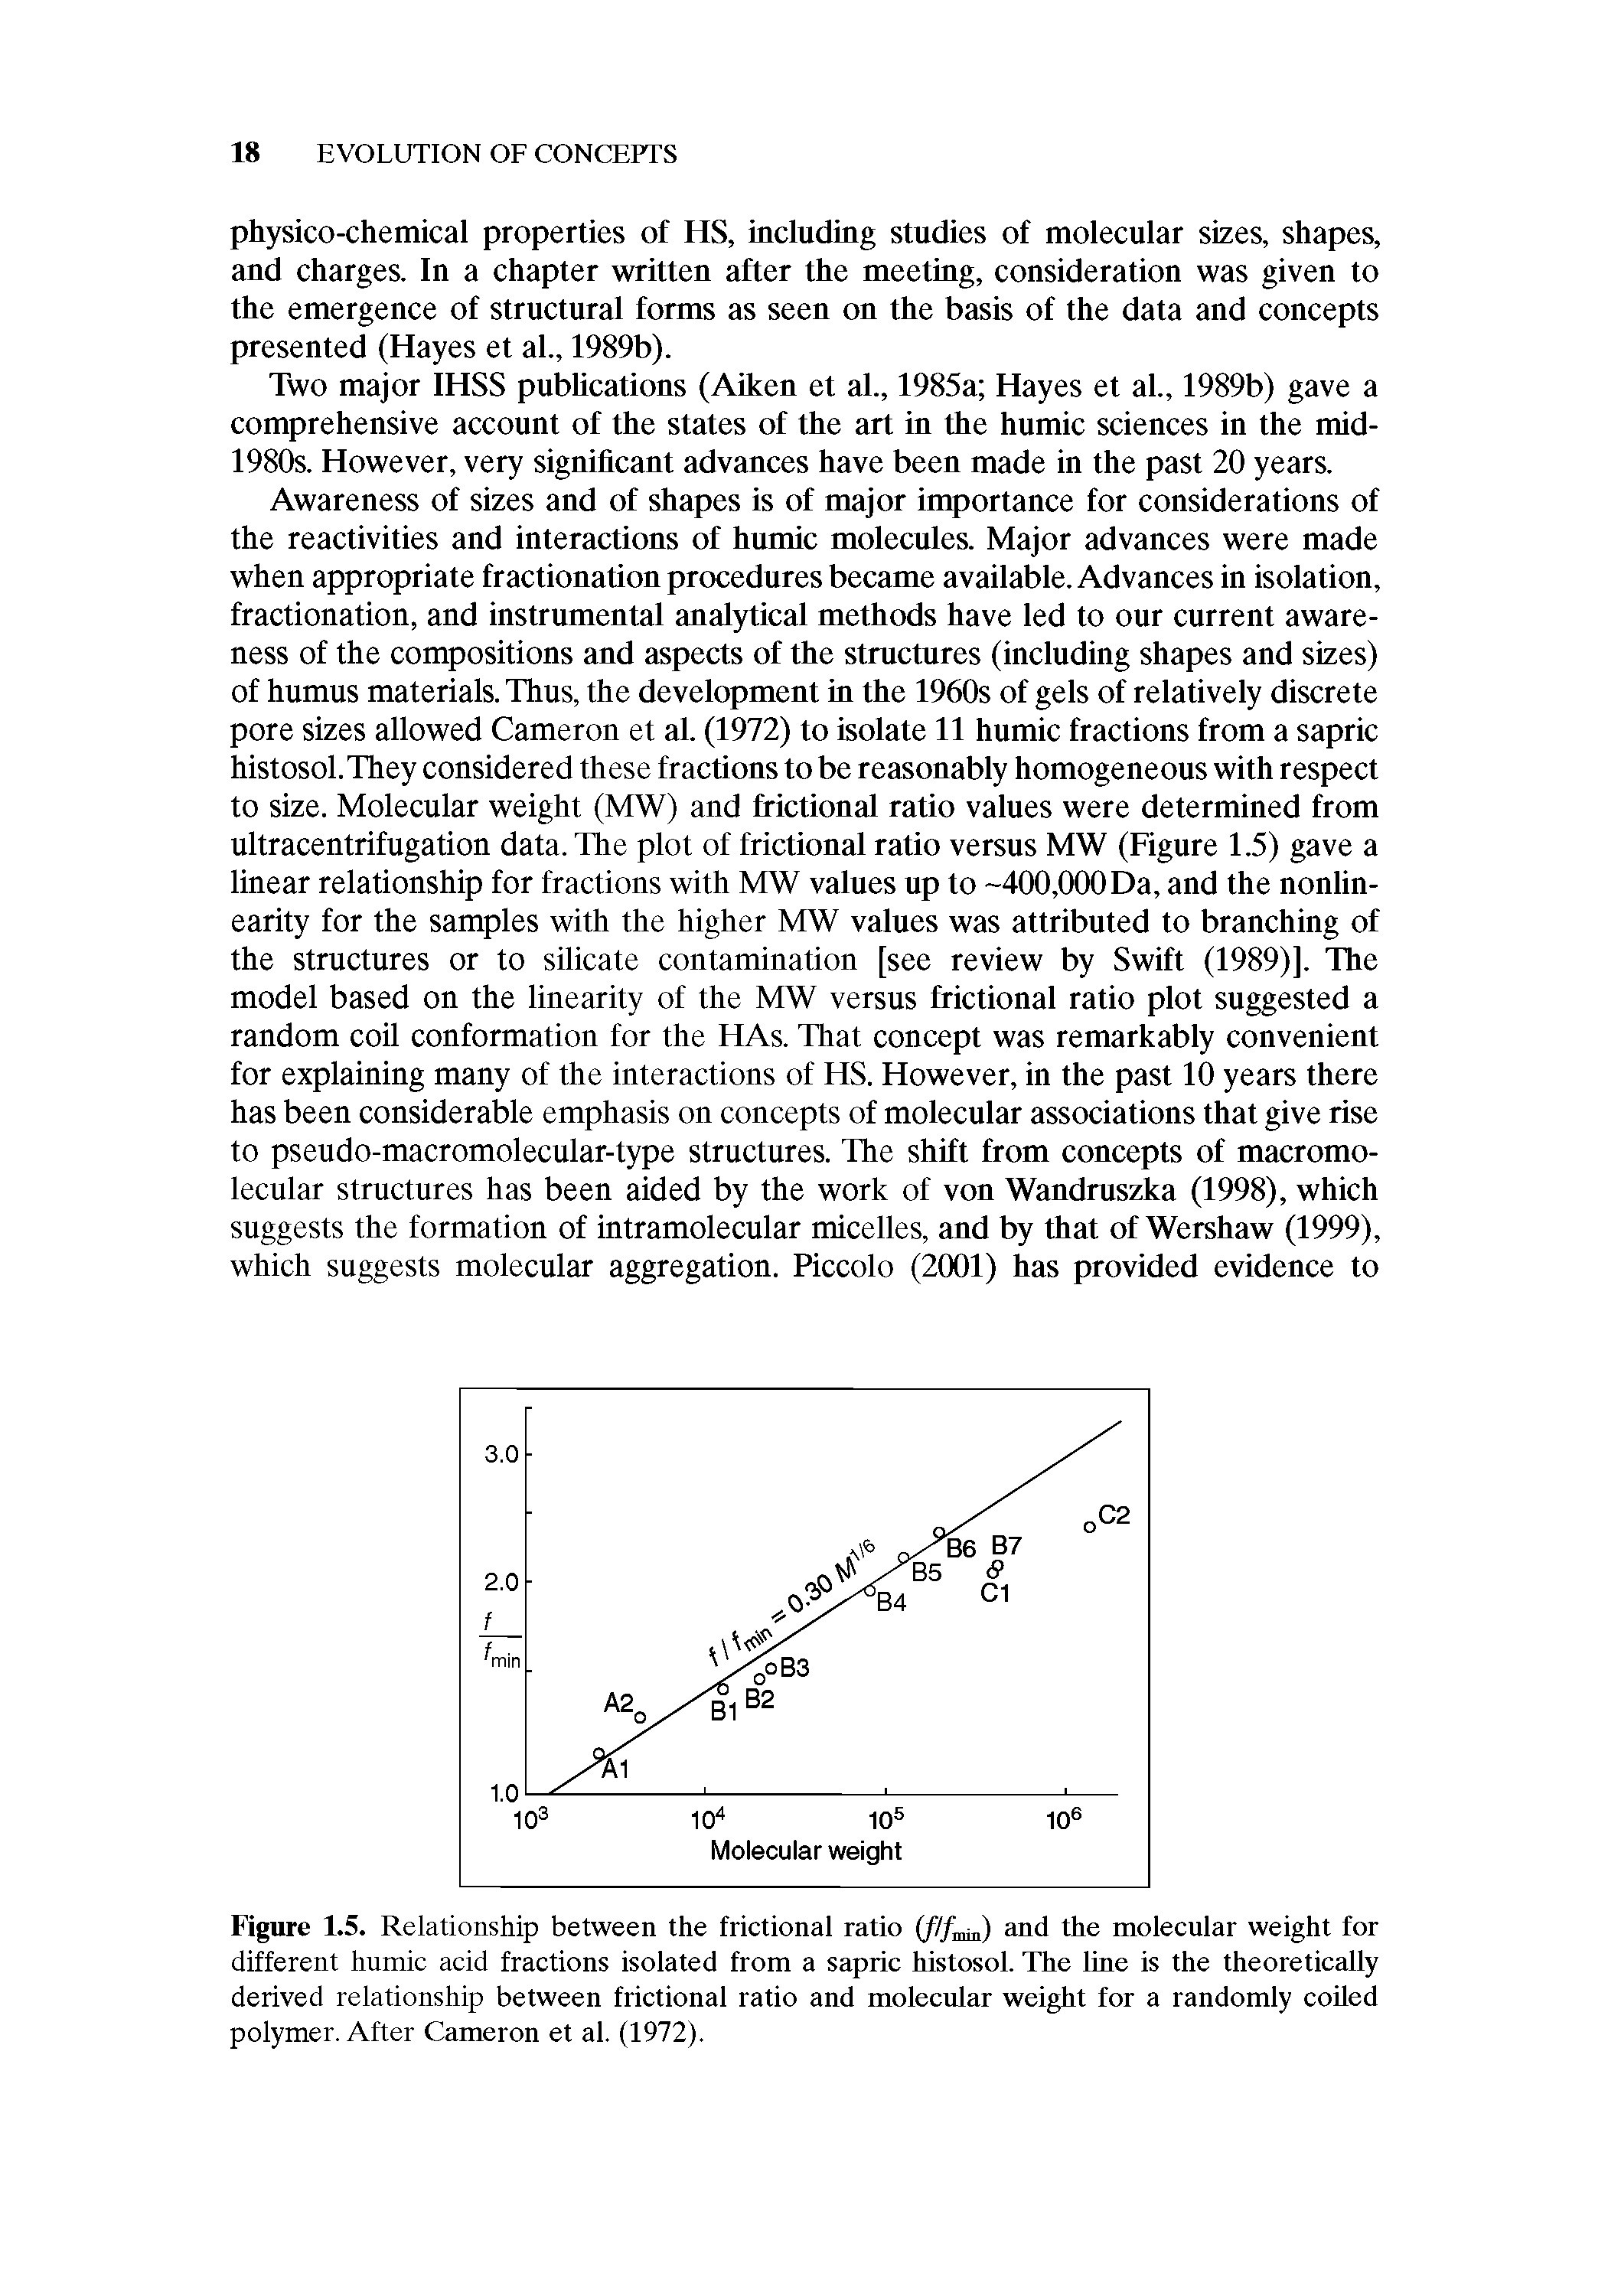 Figure 1.5. Relationship between the frictional ratio (/// ,m) and the molecular weight for different humic acid fractions isolated from a sapric histosol. The line is the theoretically derived relationship between frictional ratio and molecular weight for a randomly coiled polymer. After Cameron et al. (1972).